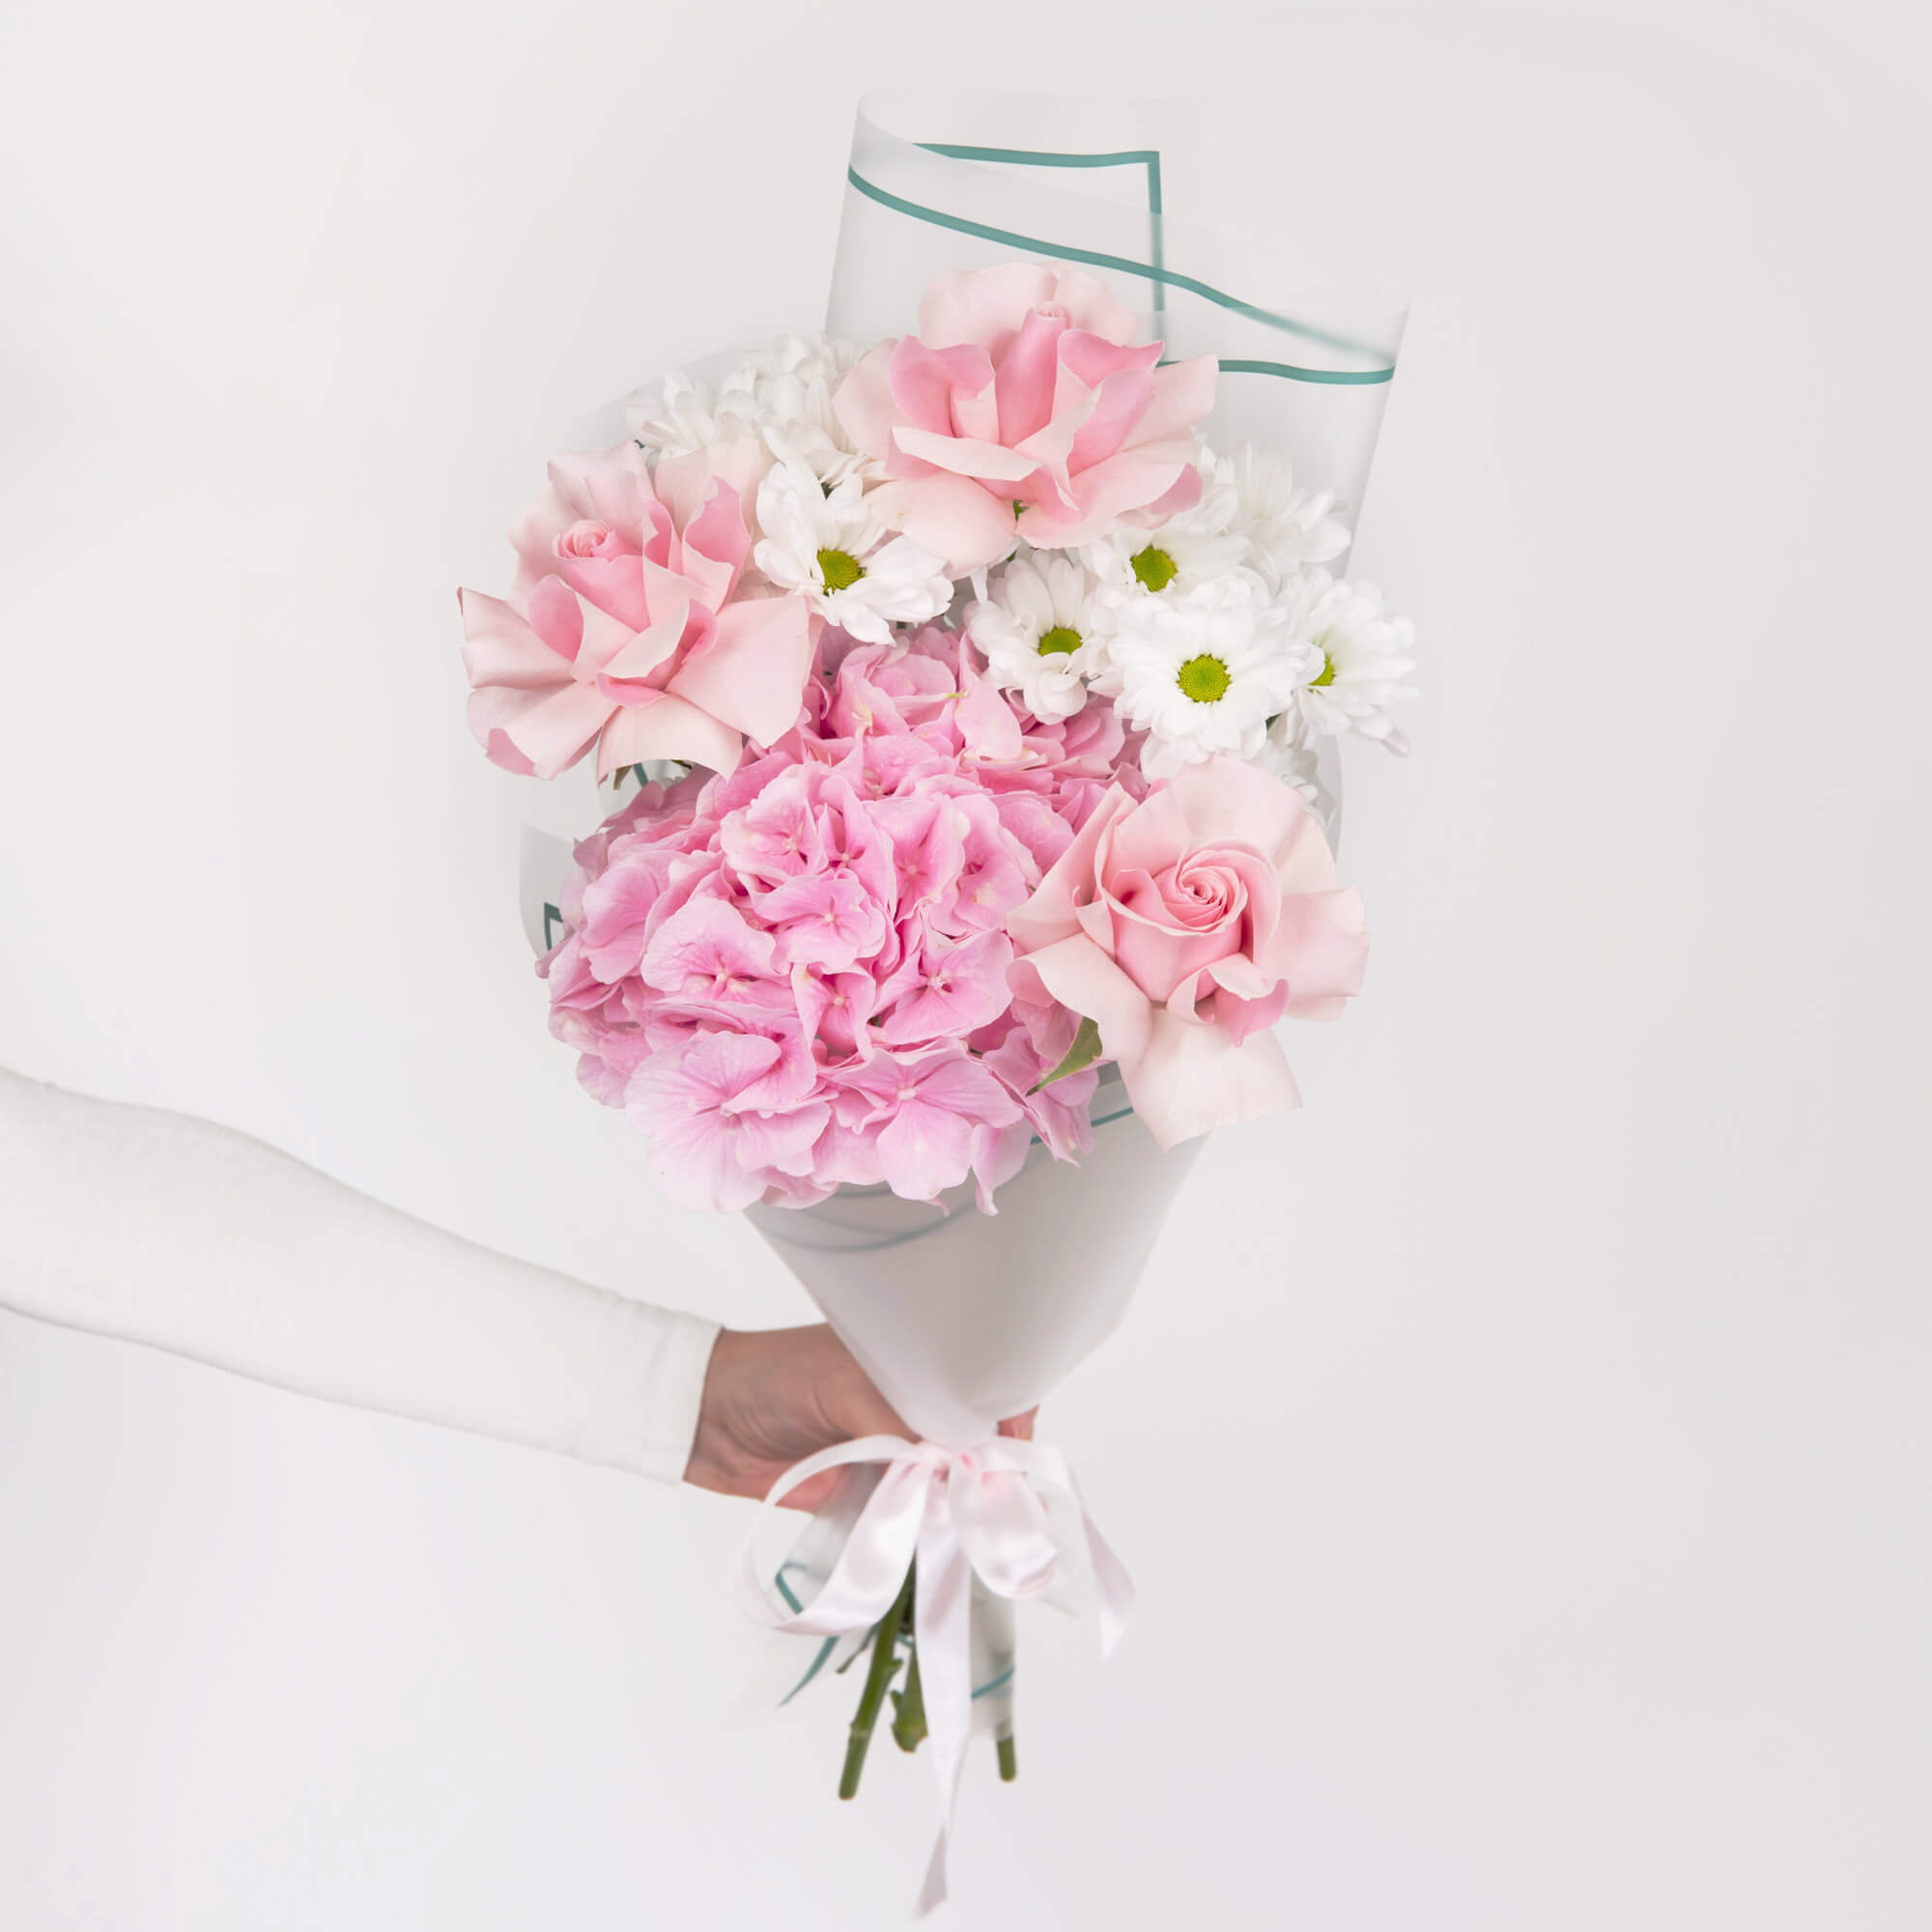 Bouquet with pink roses and chrysanthemums